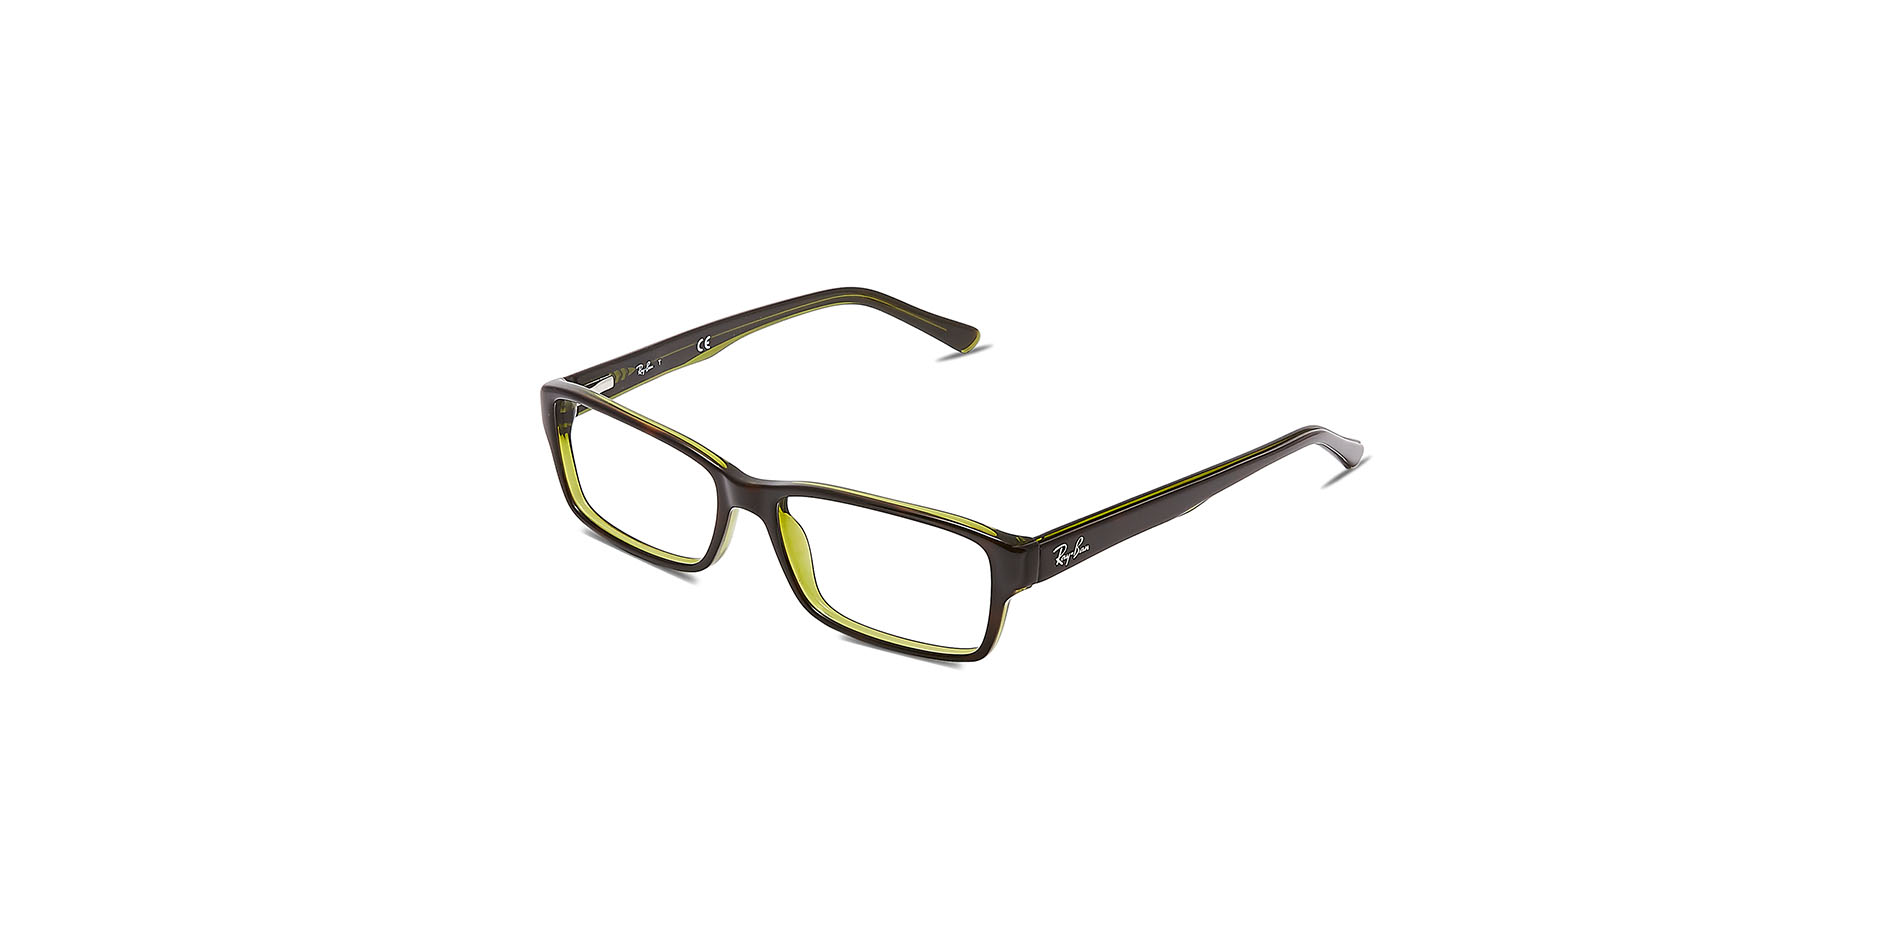 Damenbrille Ray-Ban RB 5169